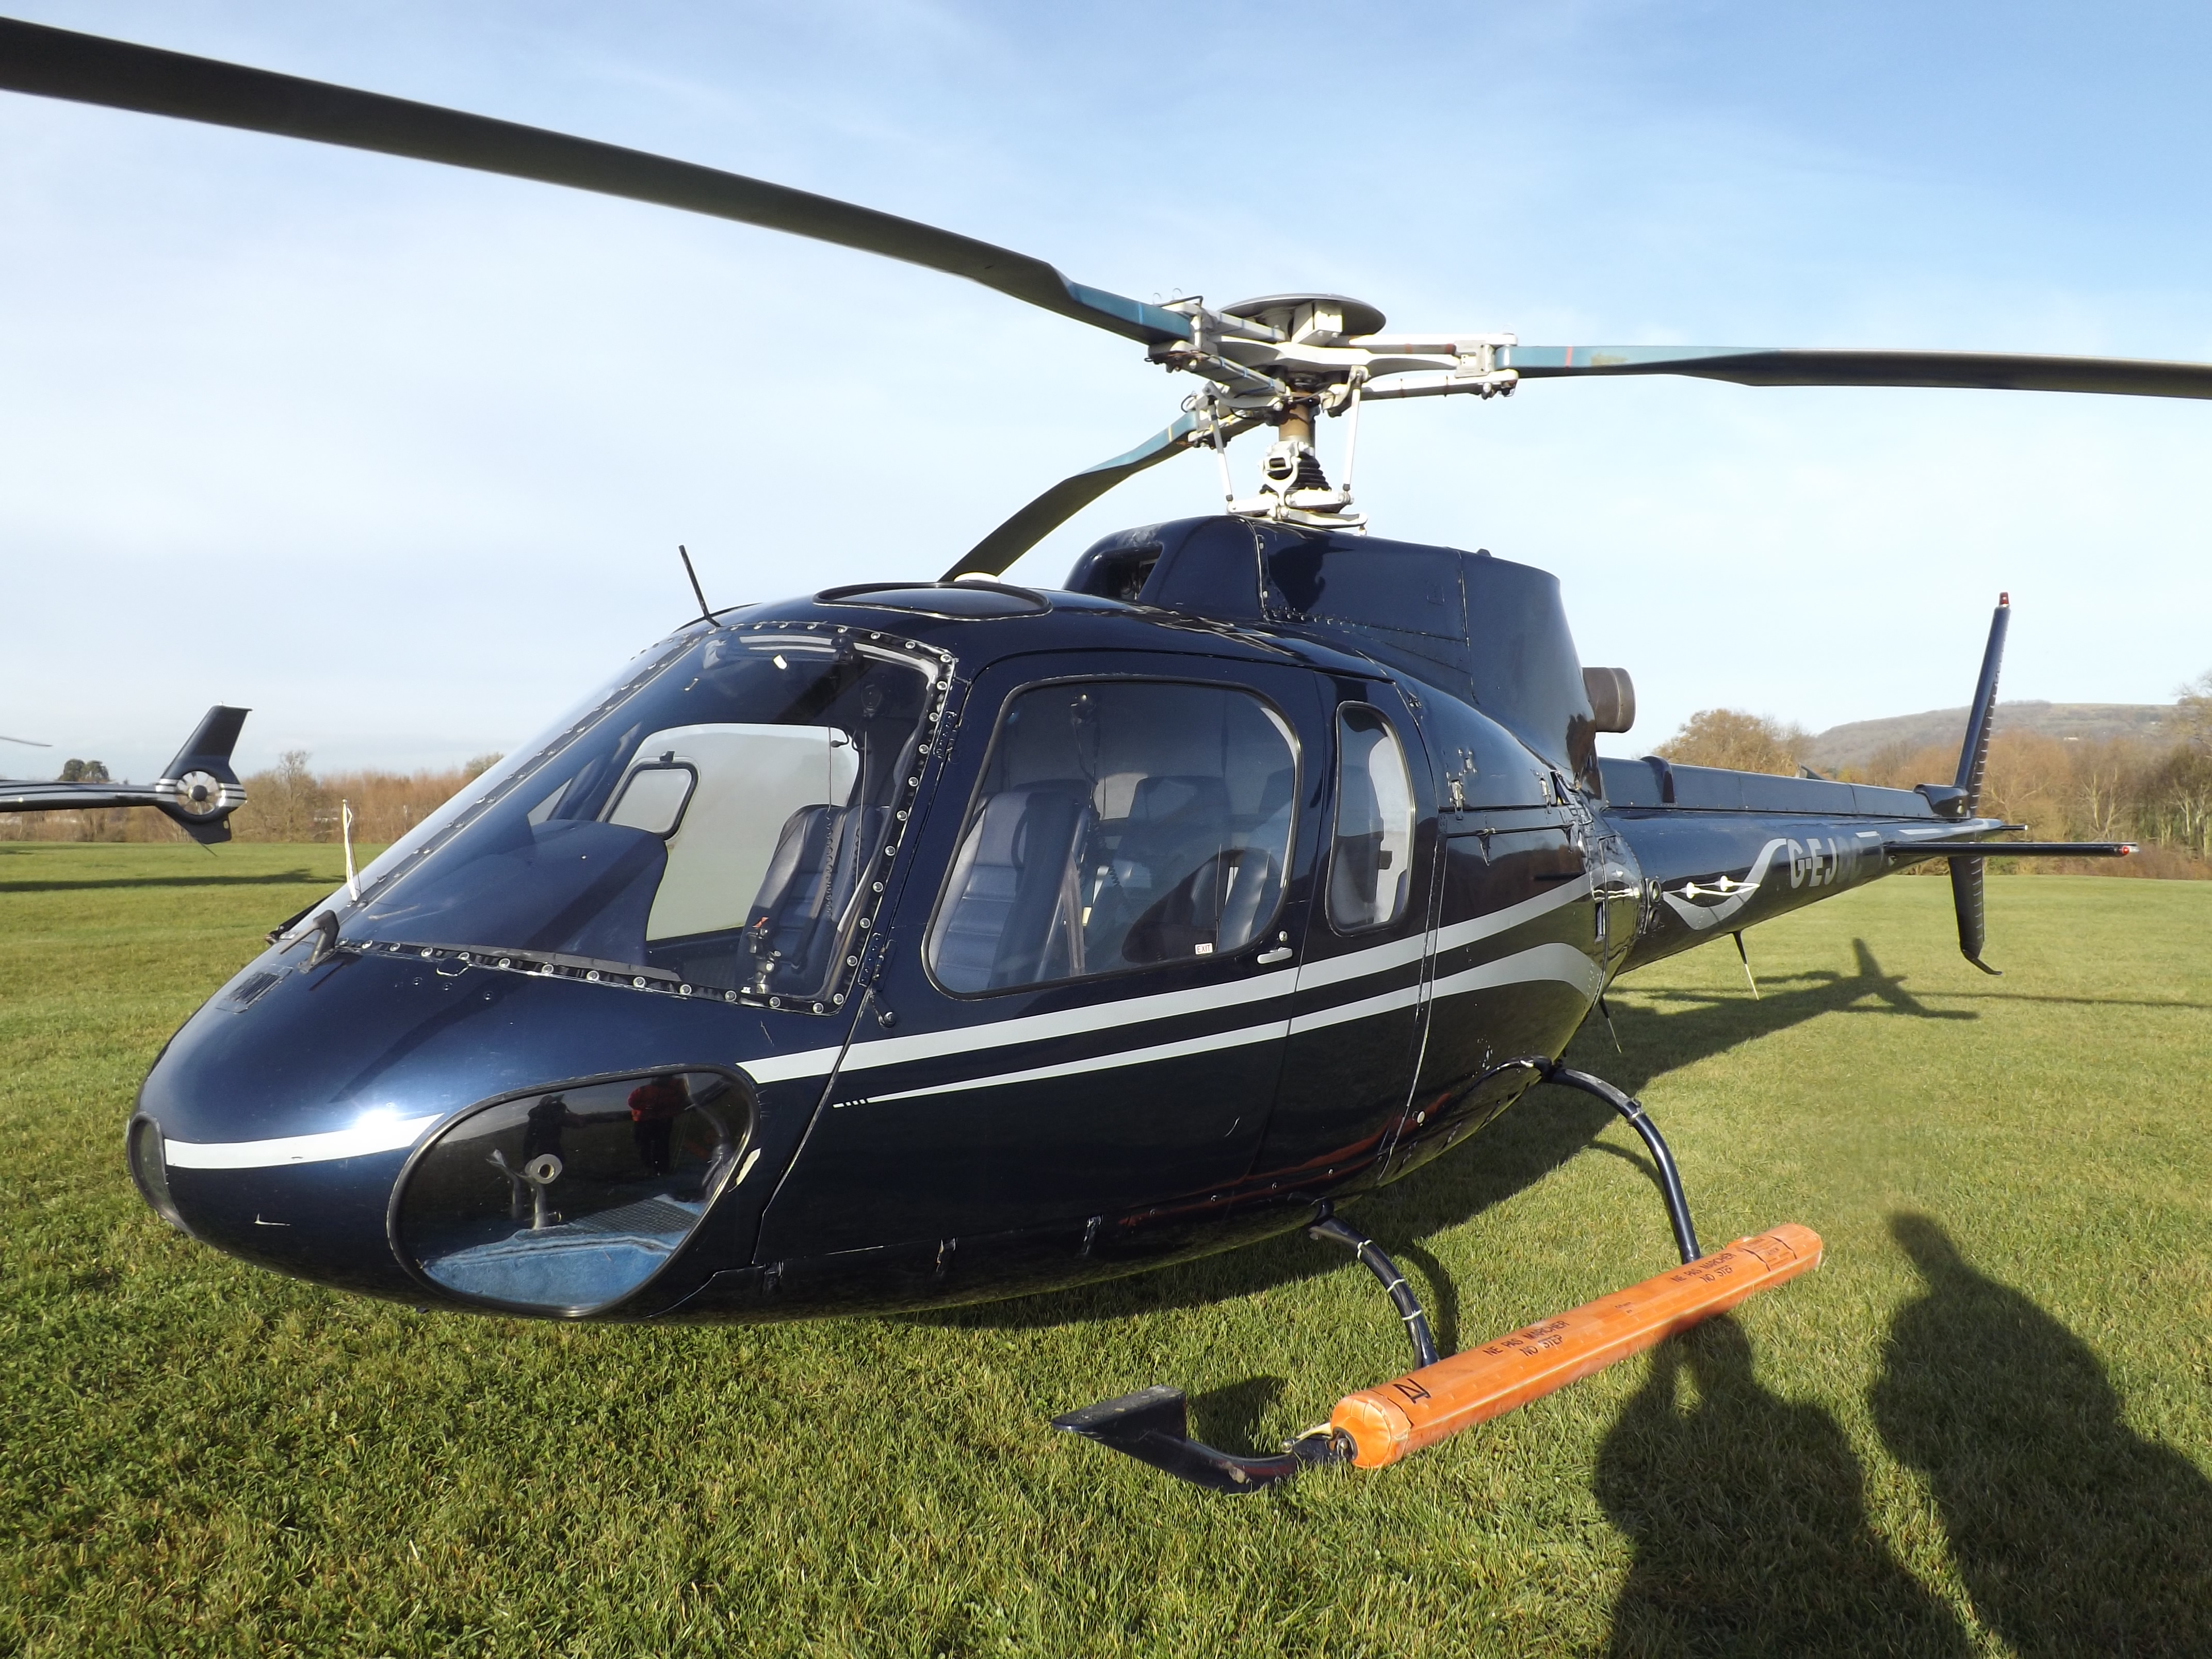 Essential Equipment and Training Requirements for Night Flights in Private Helicopters